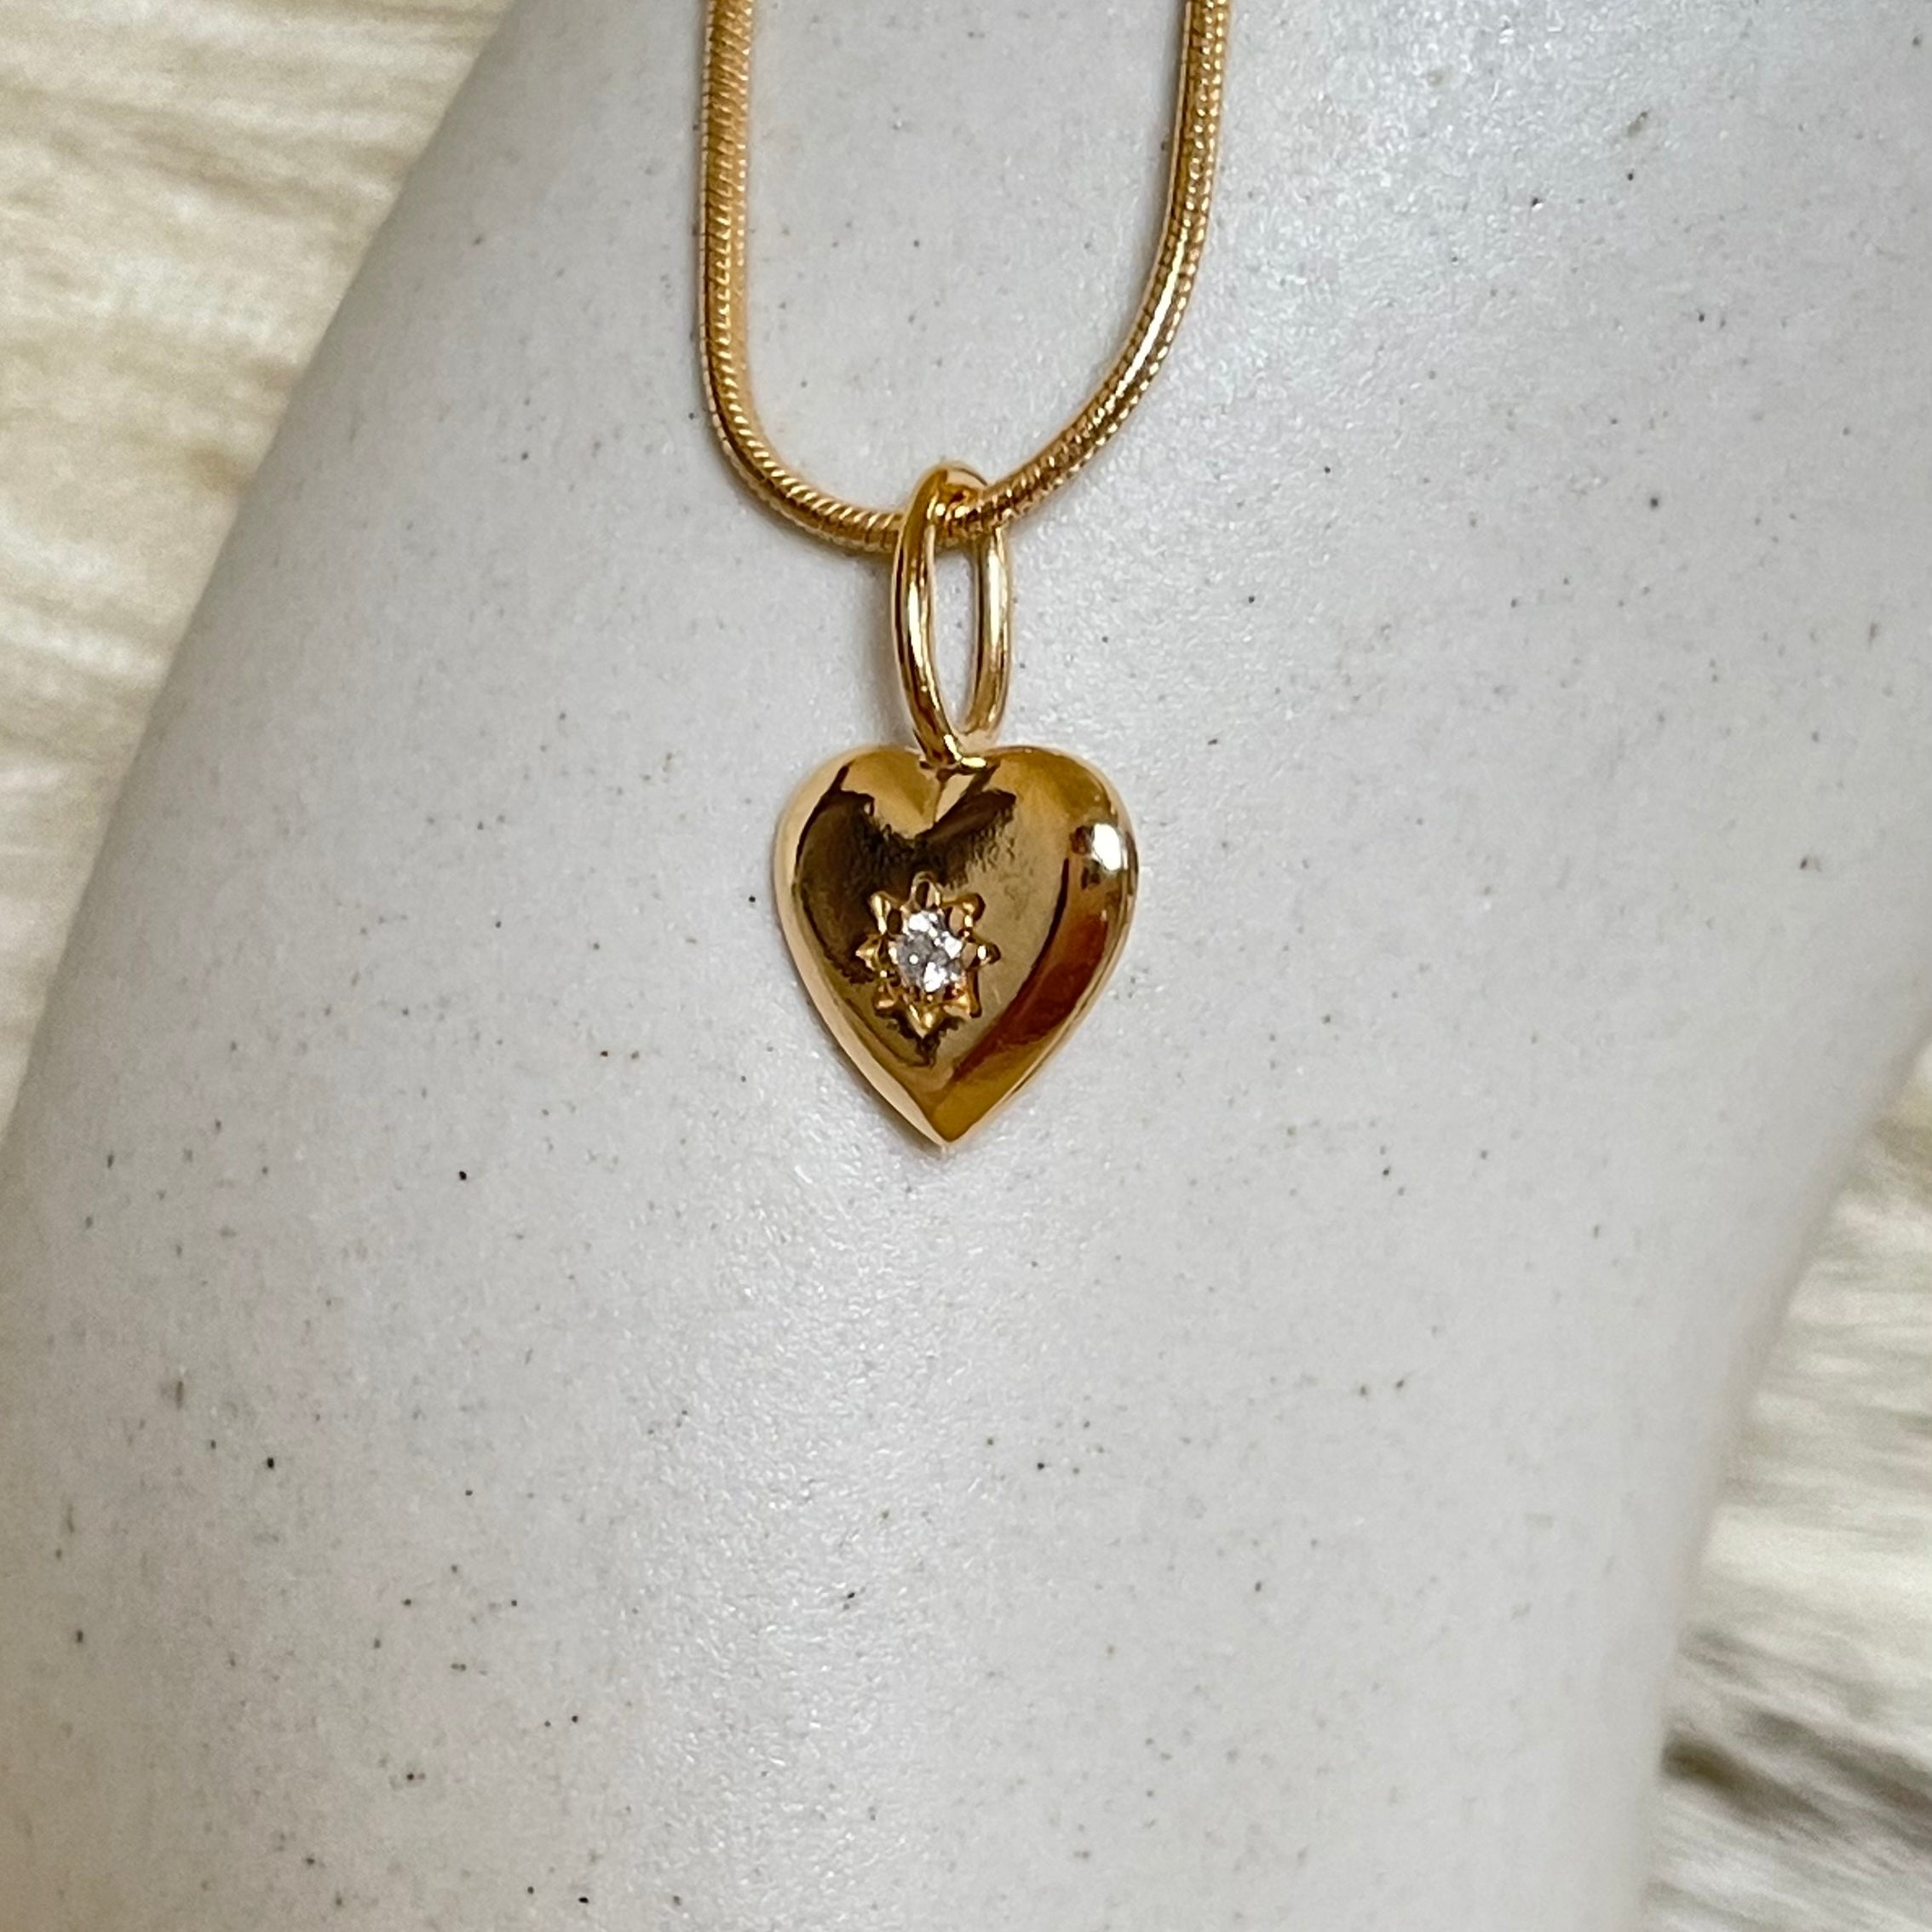 Vintage Heart Studded Minimal Necklace with Snake Chain - Octonov 